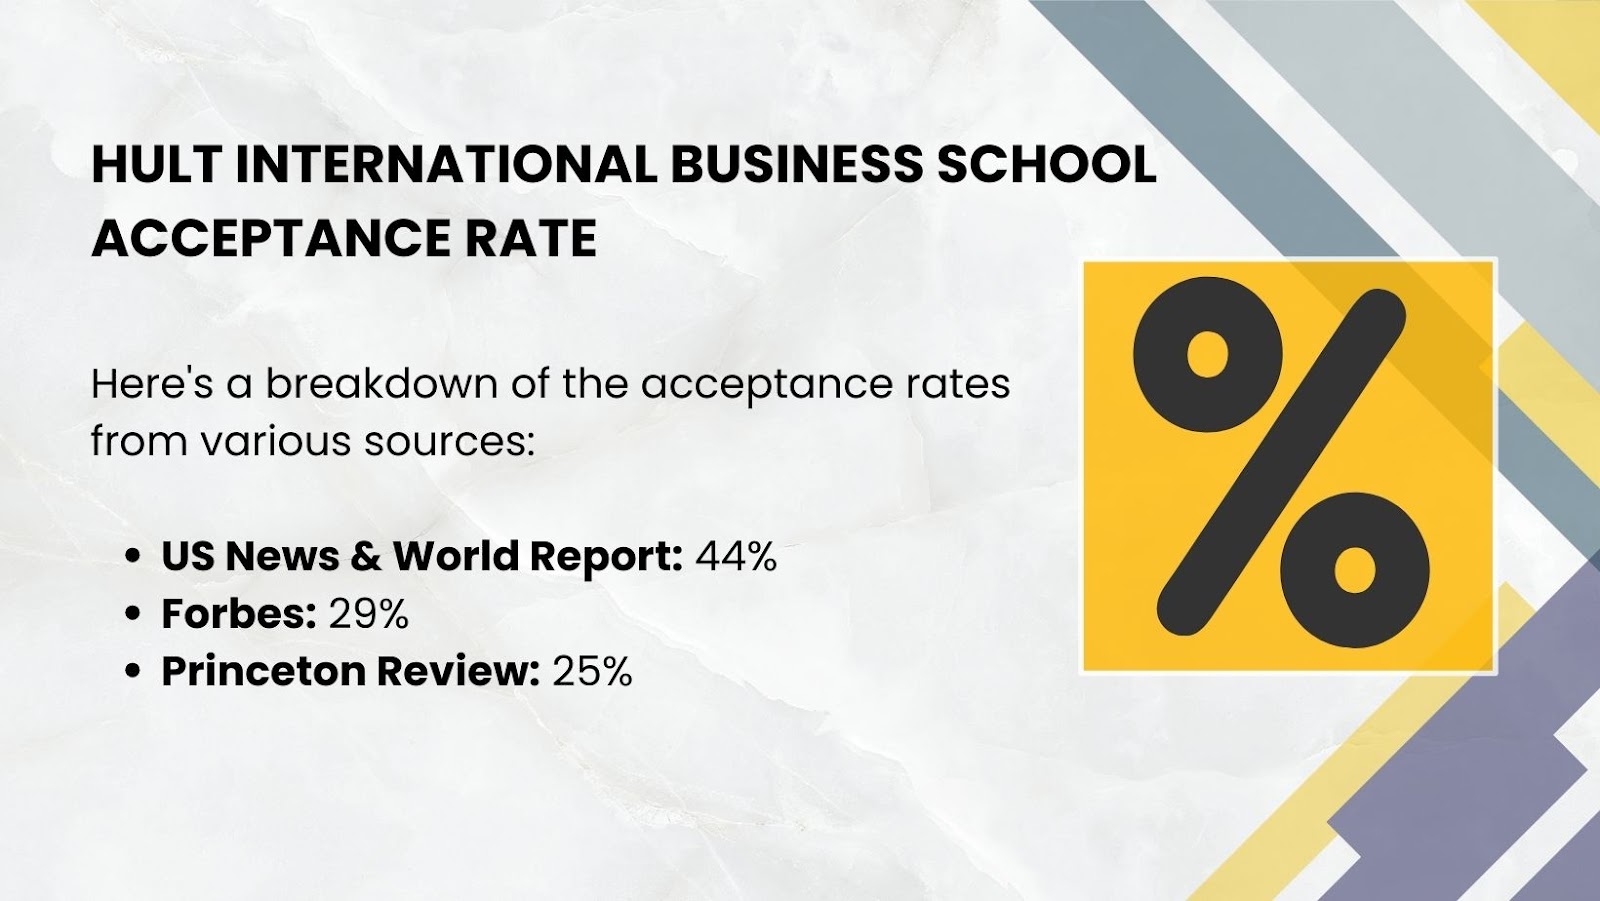 Hult International Business School acceptance rate